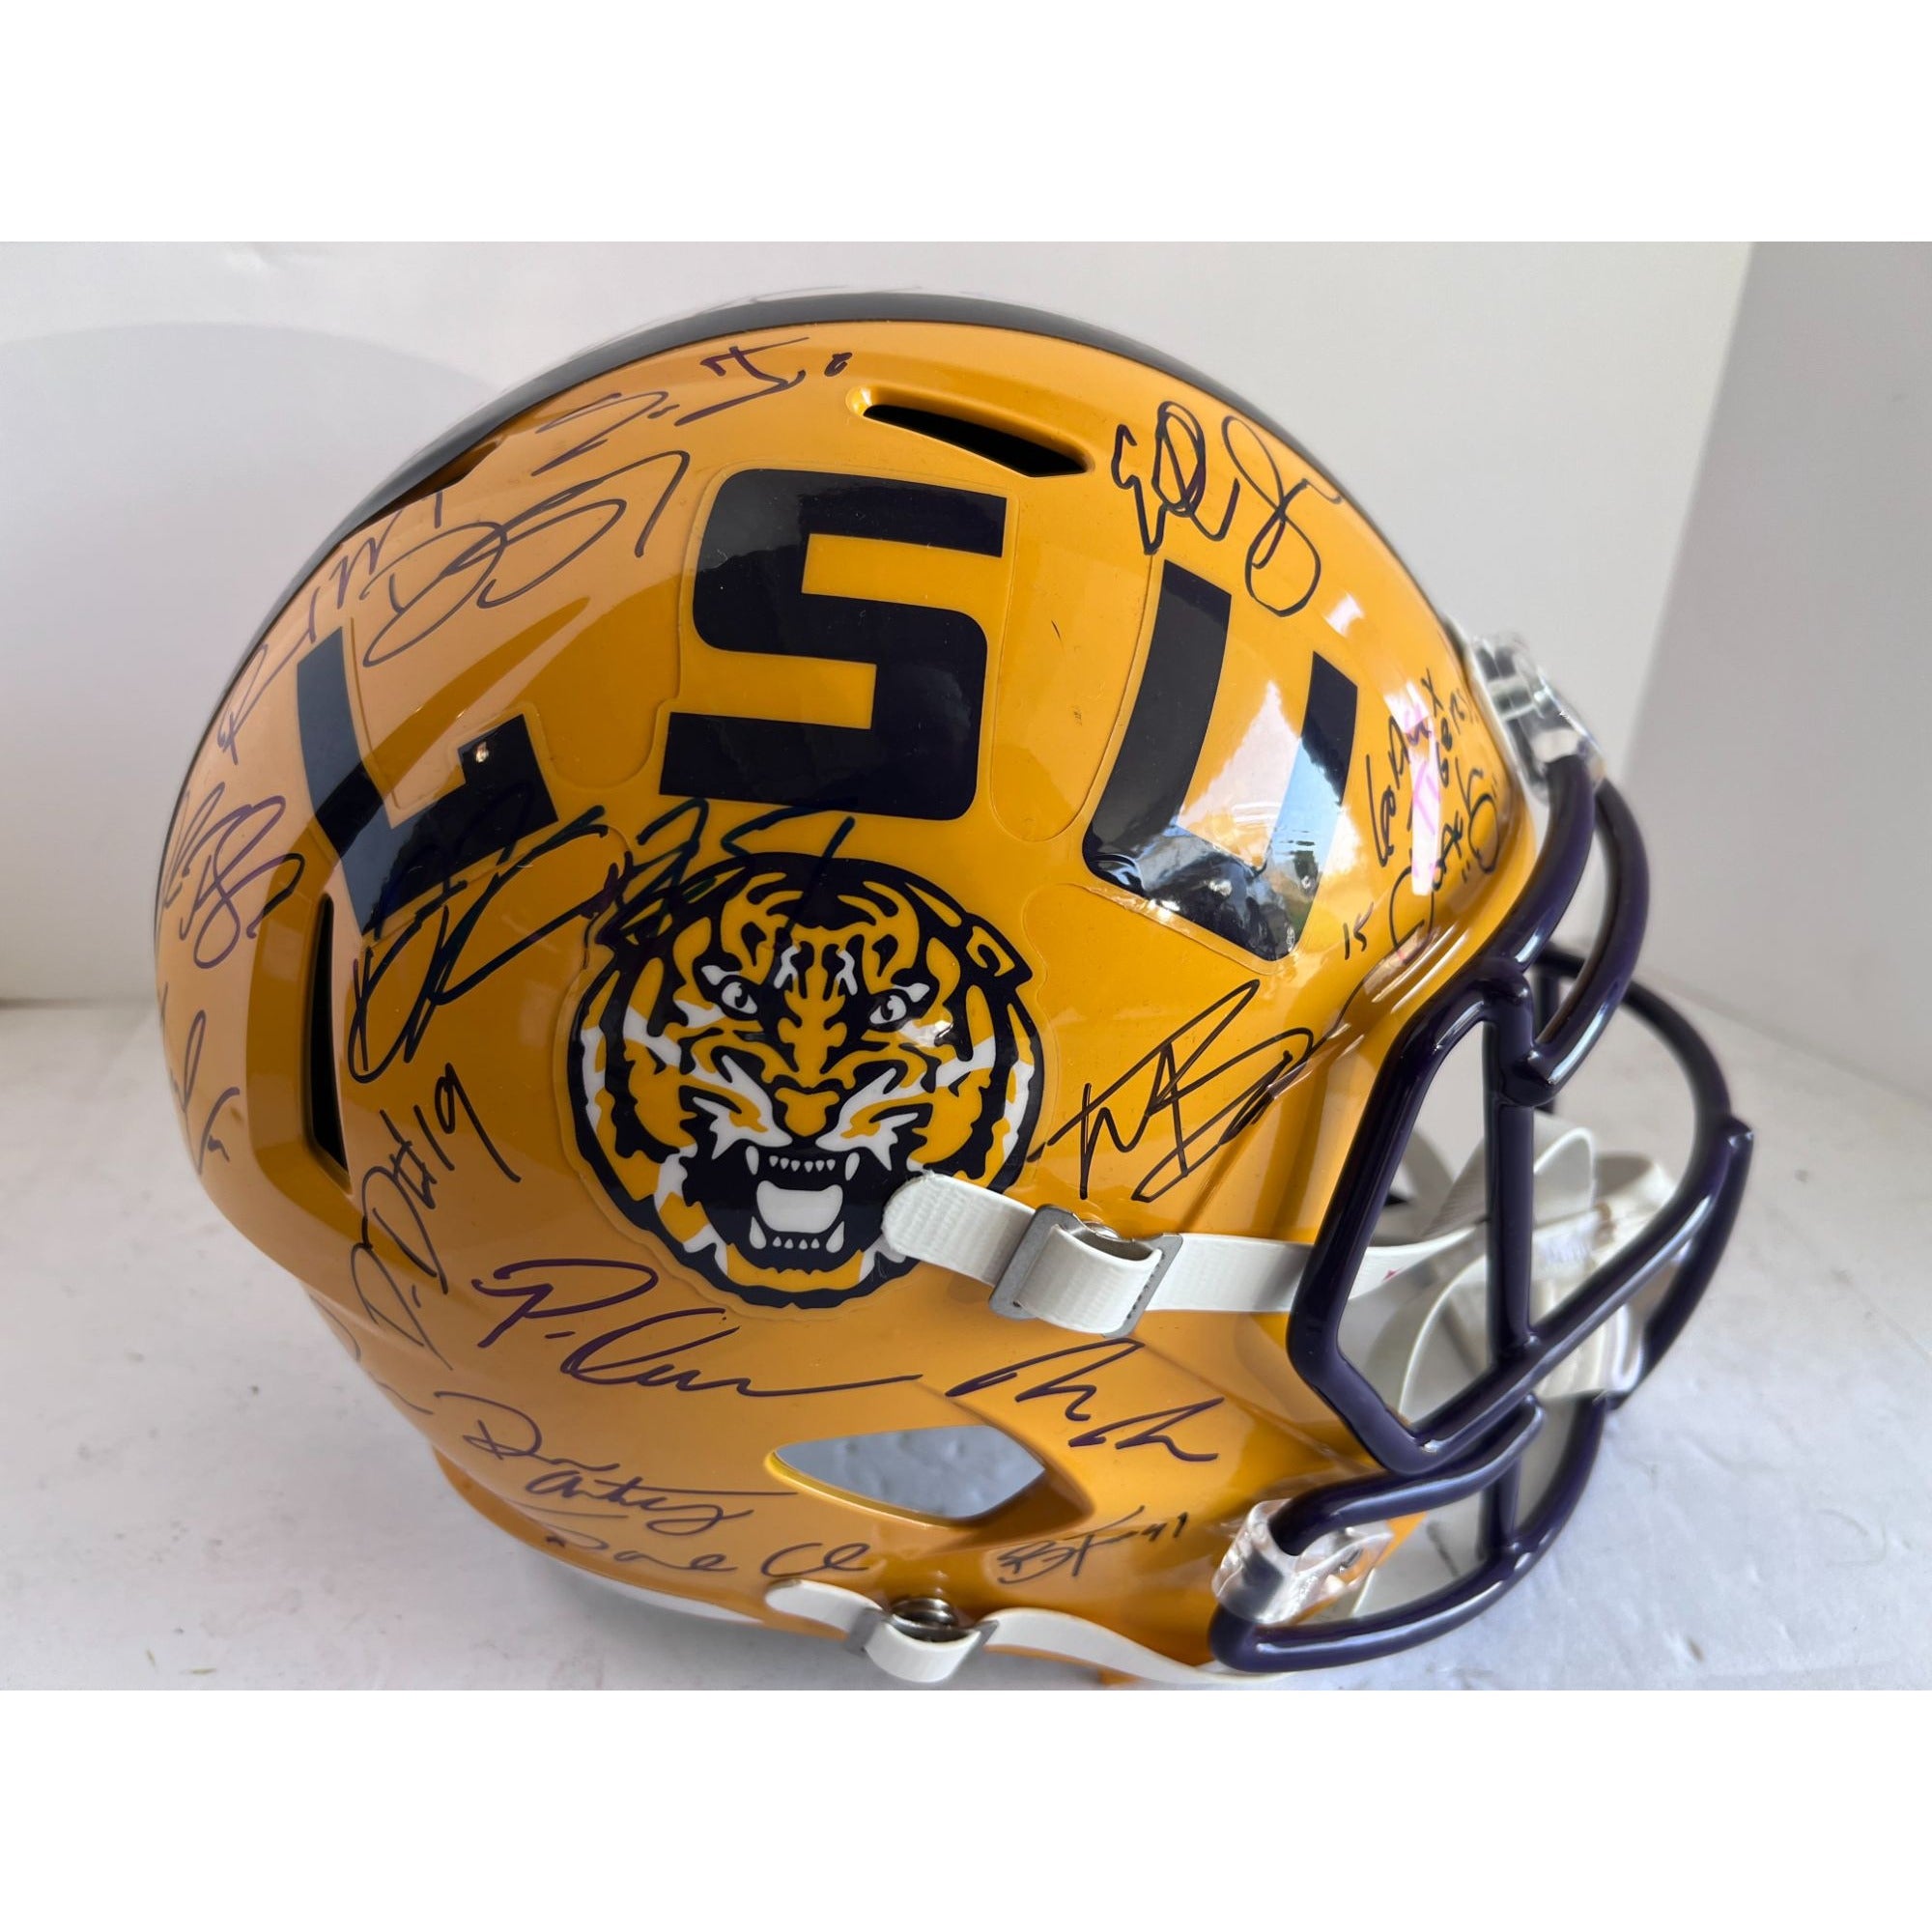 Joe Burrow Ja'Marr Chase LSU Tigers full size National Champions Ridell helmet signed with with proof